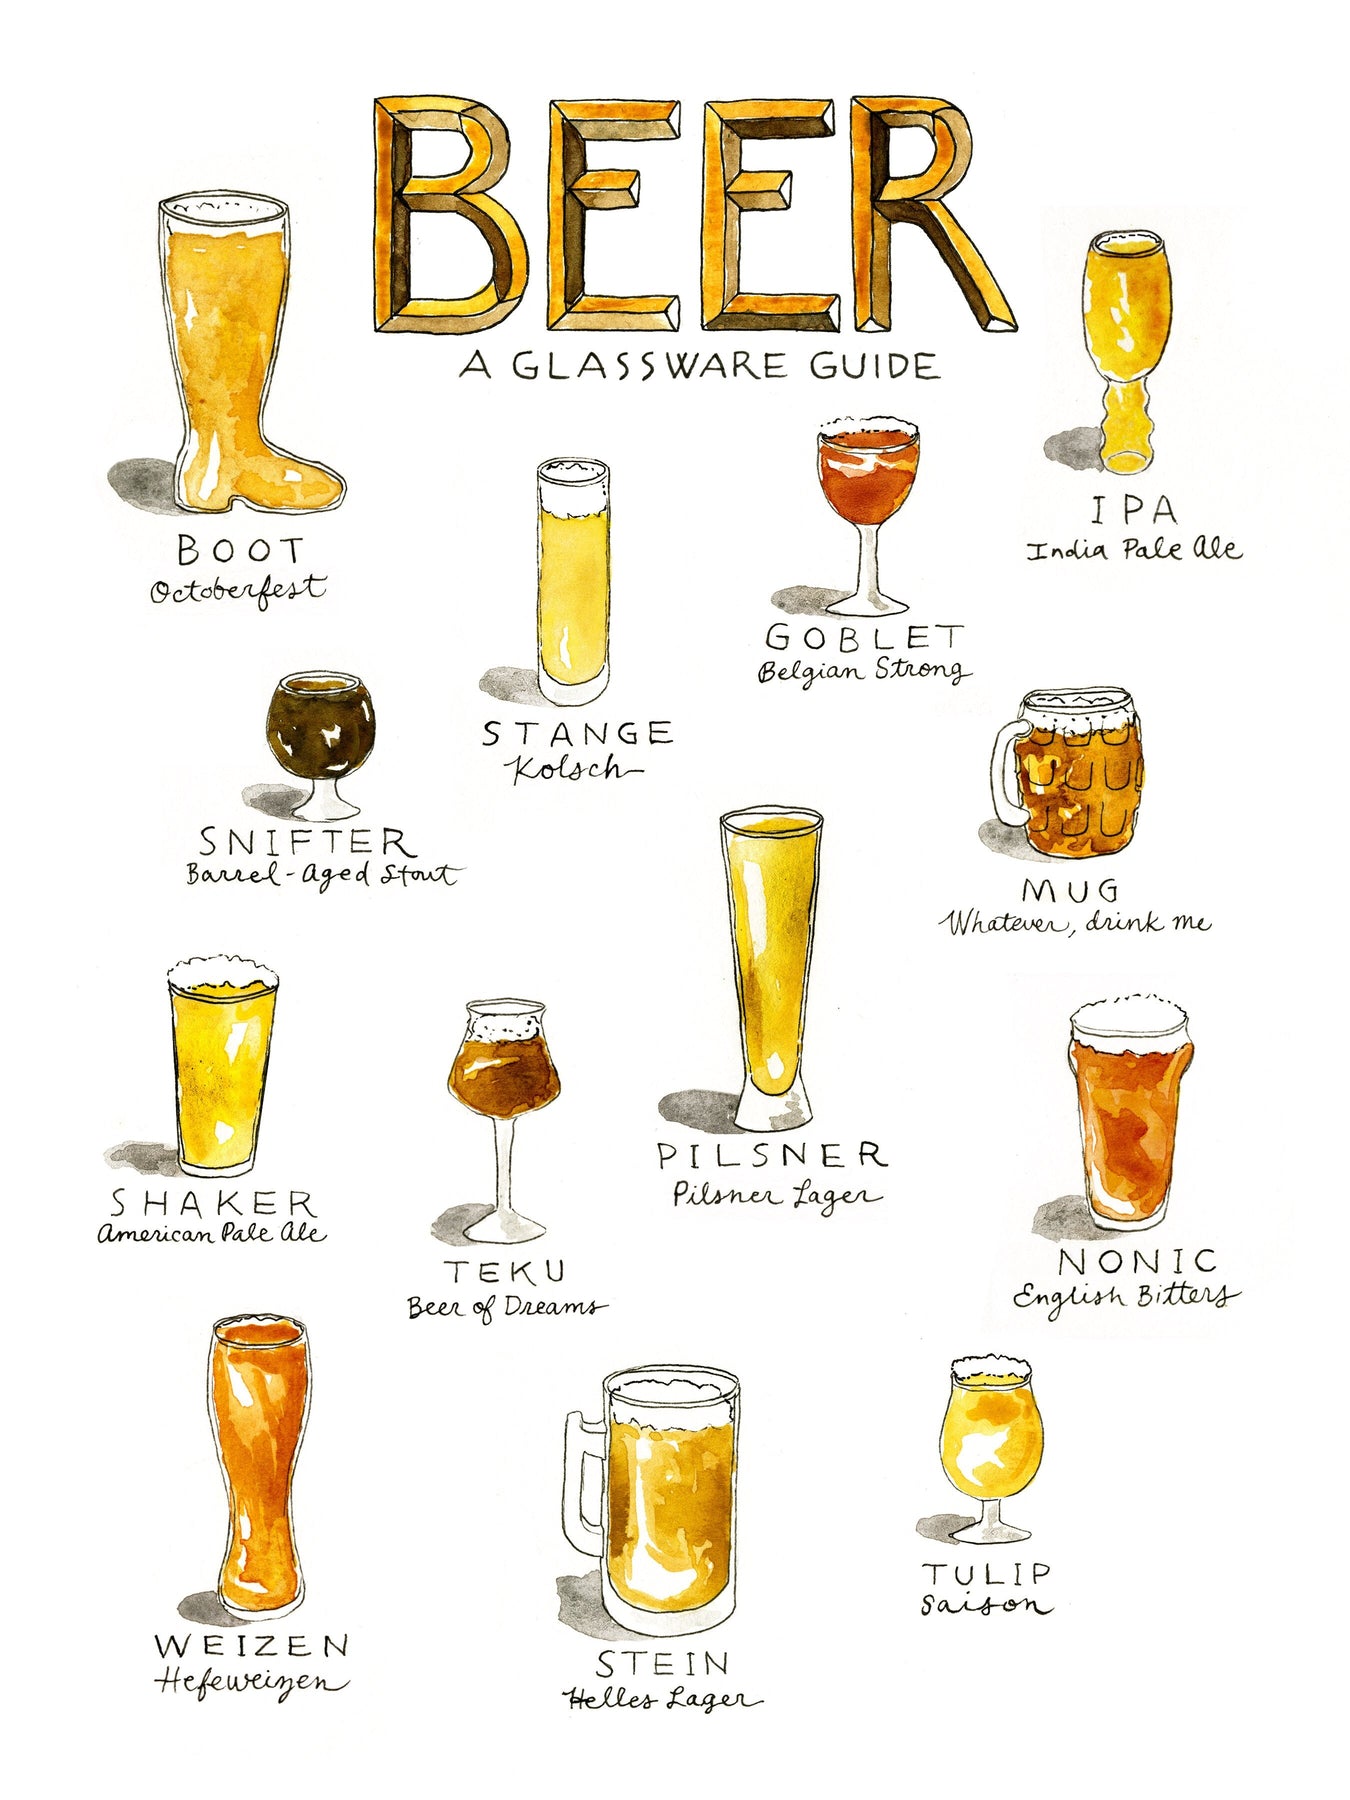 The Complete Guide to Beer Glassware: Understanding Types, Styles